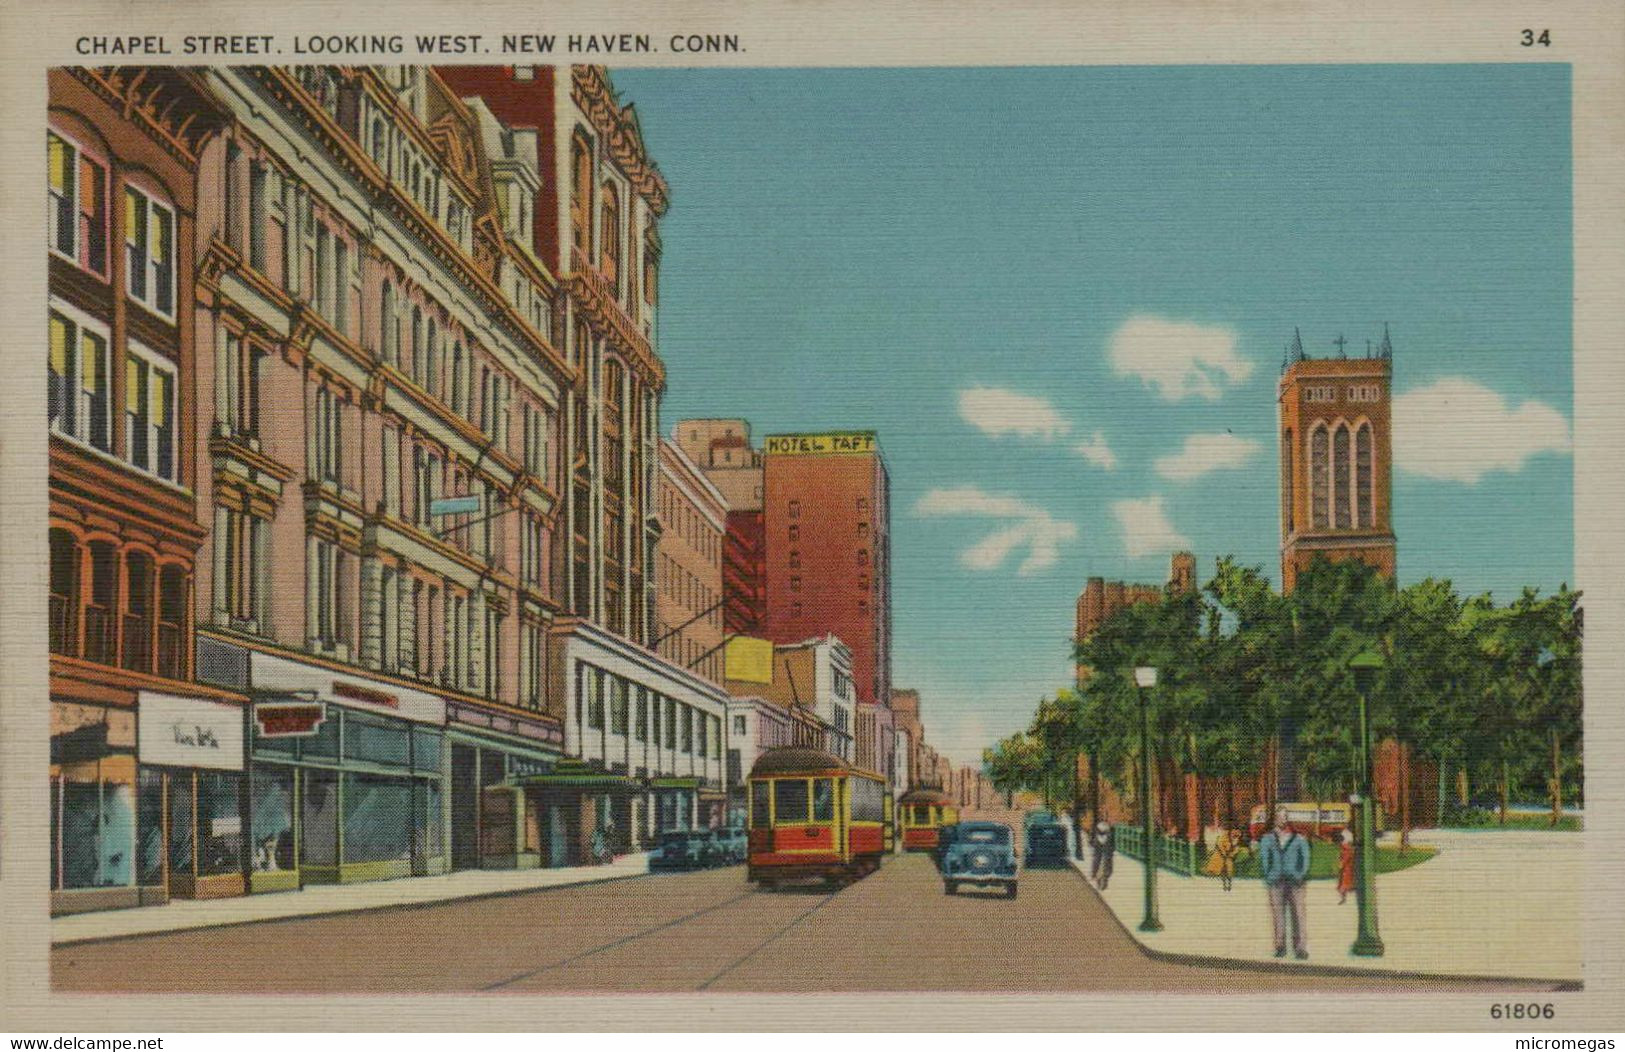 Chapel Street, Looking West, New Haven, Conn. - New Haven